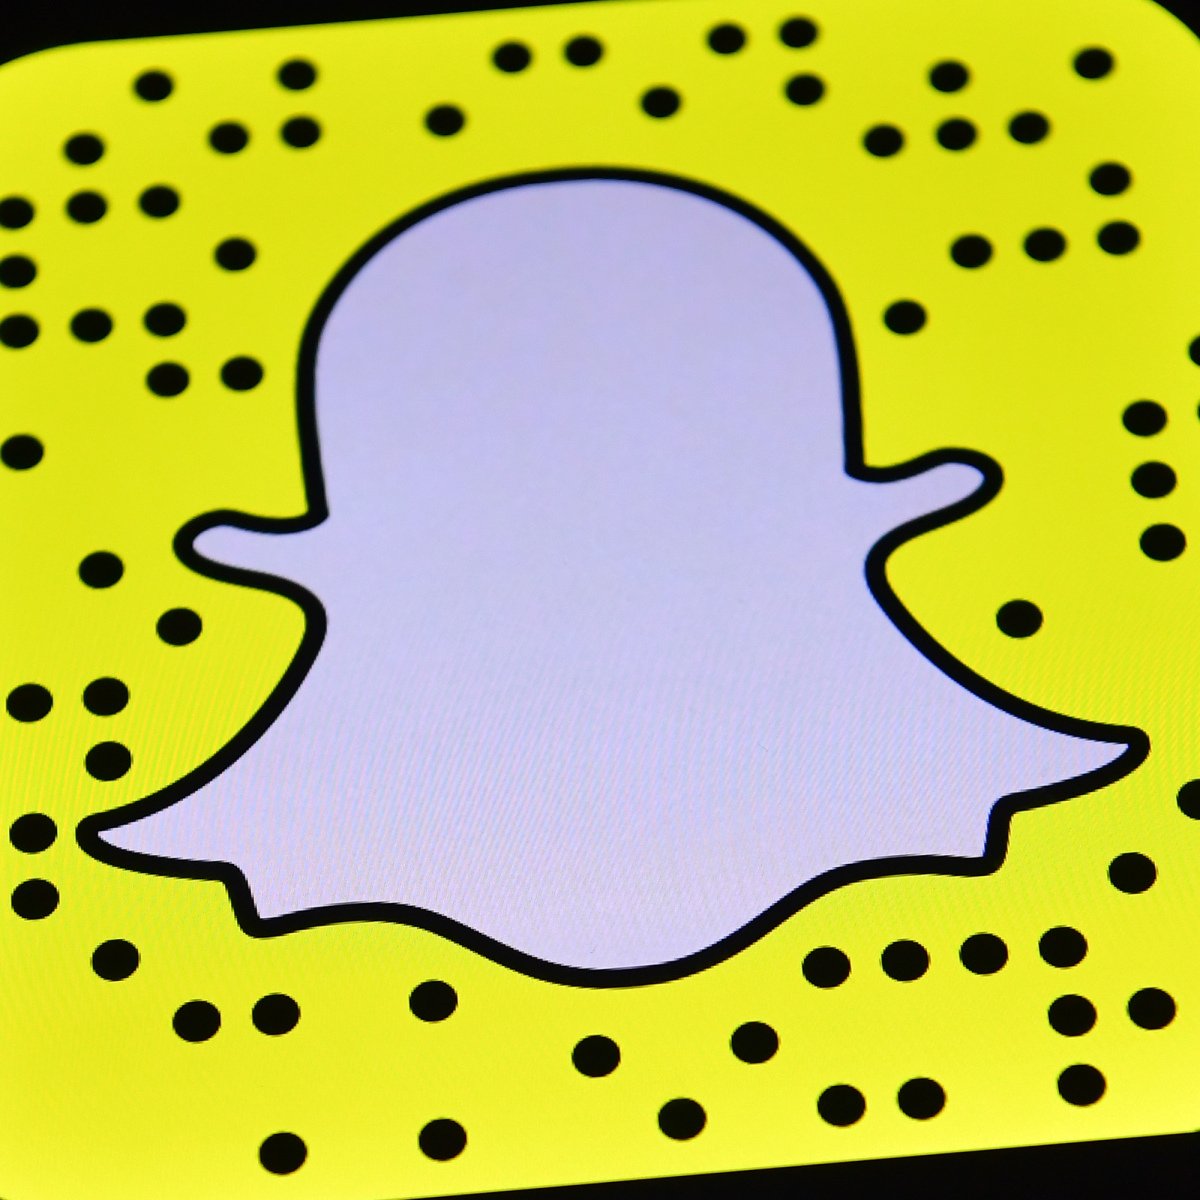 dan mihalic recommends Sexting On Snapchat